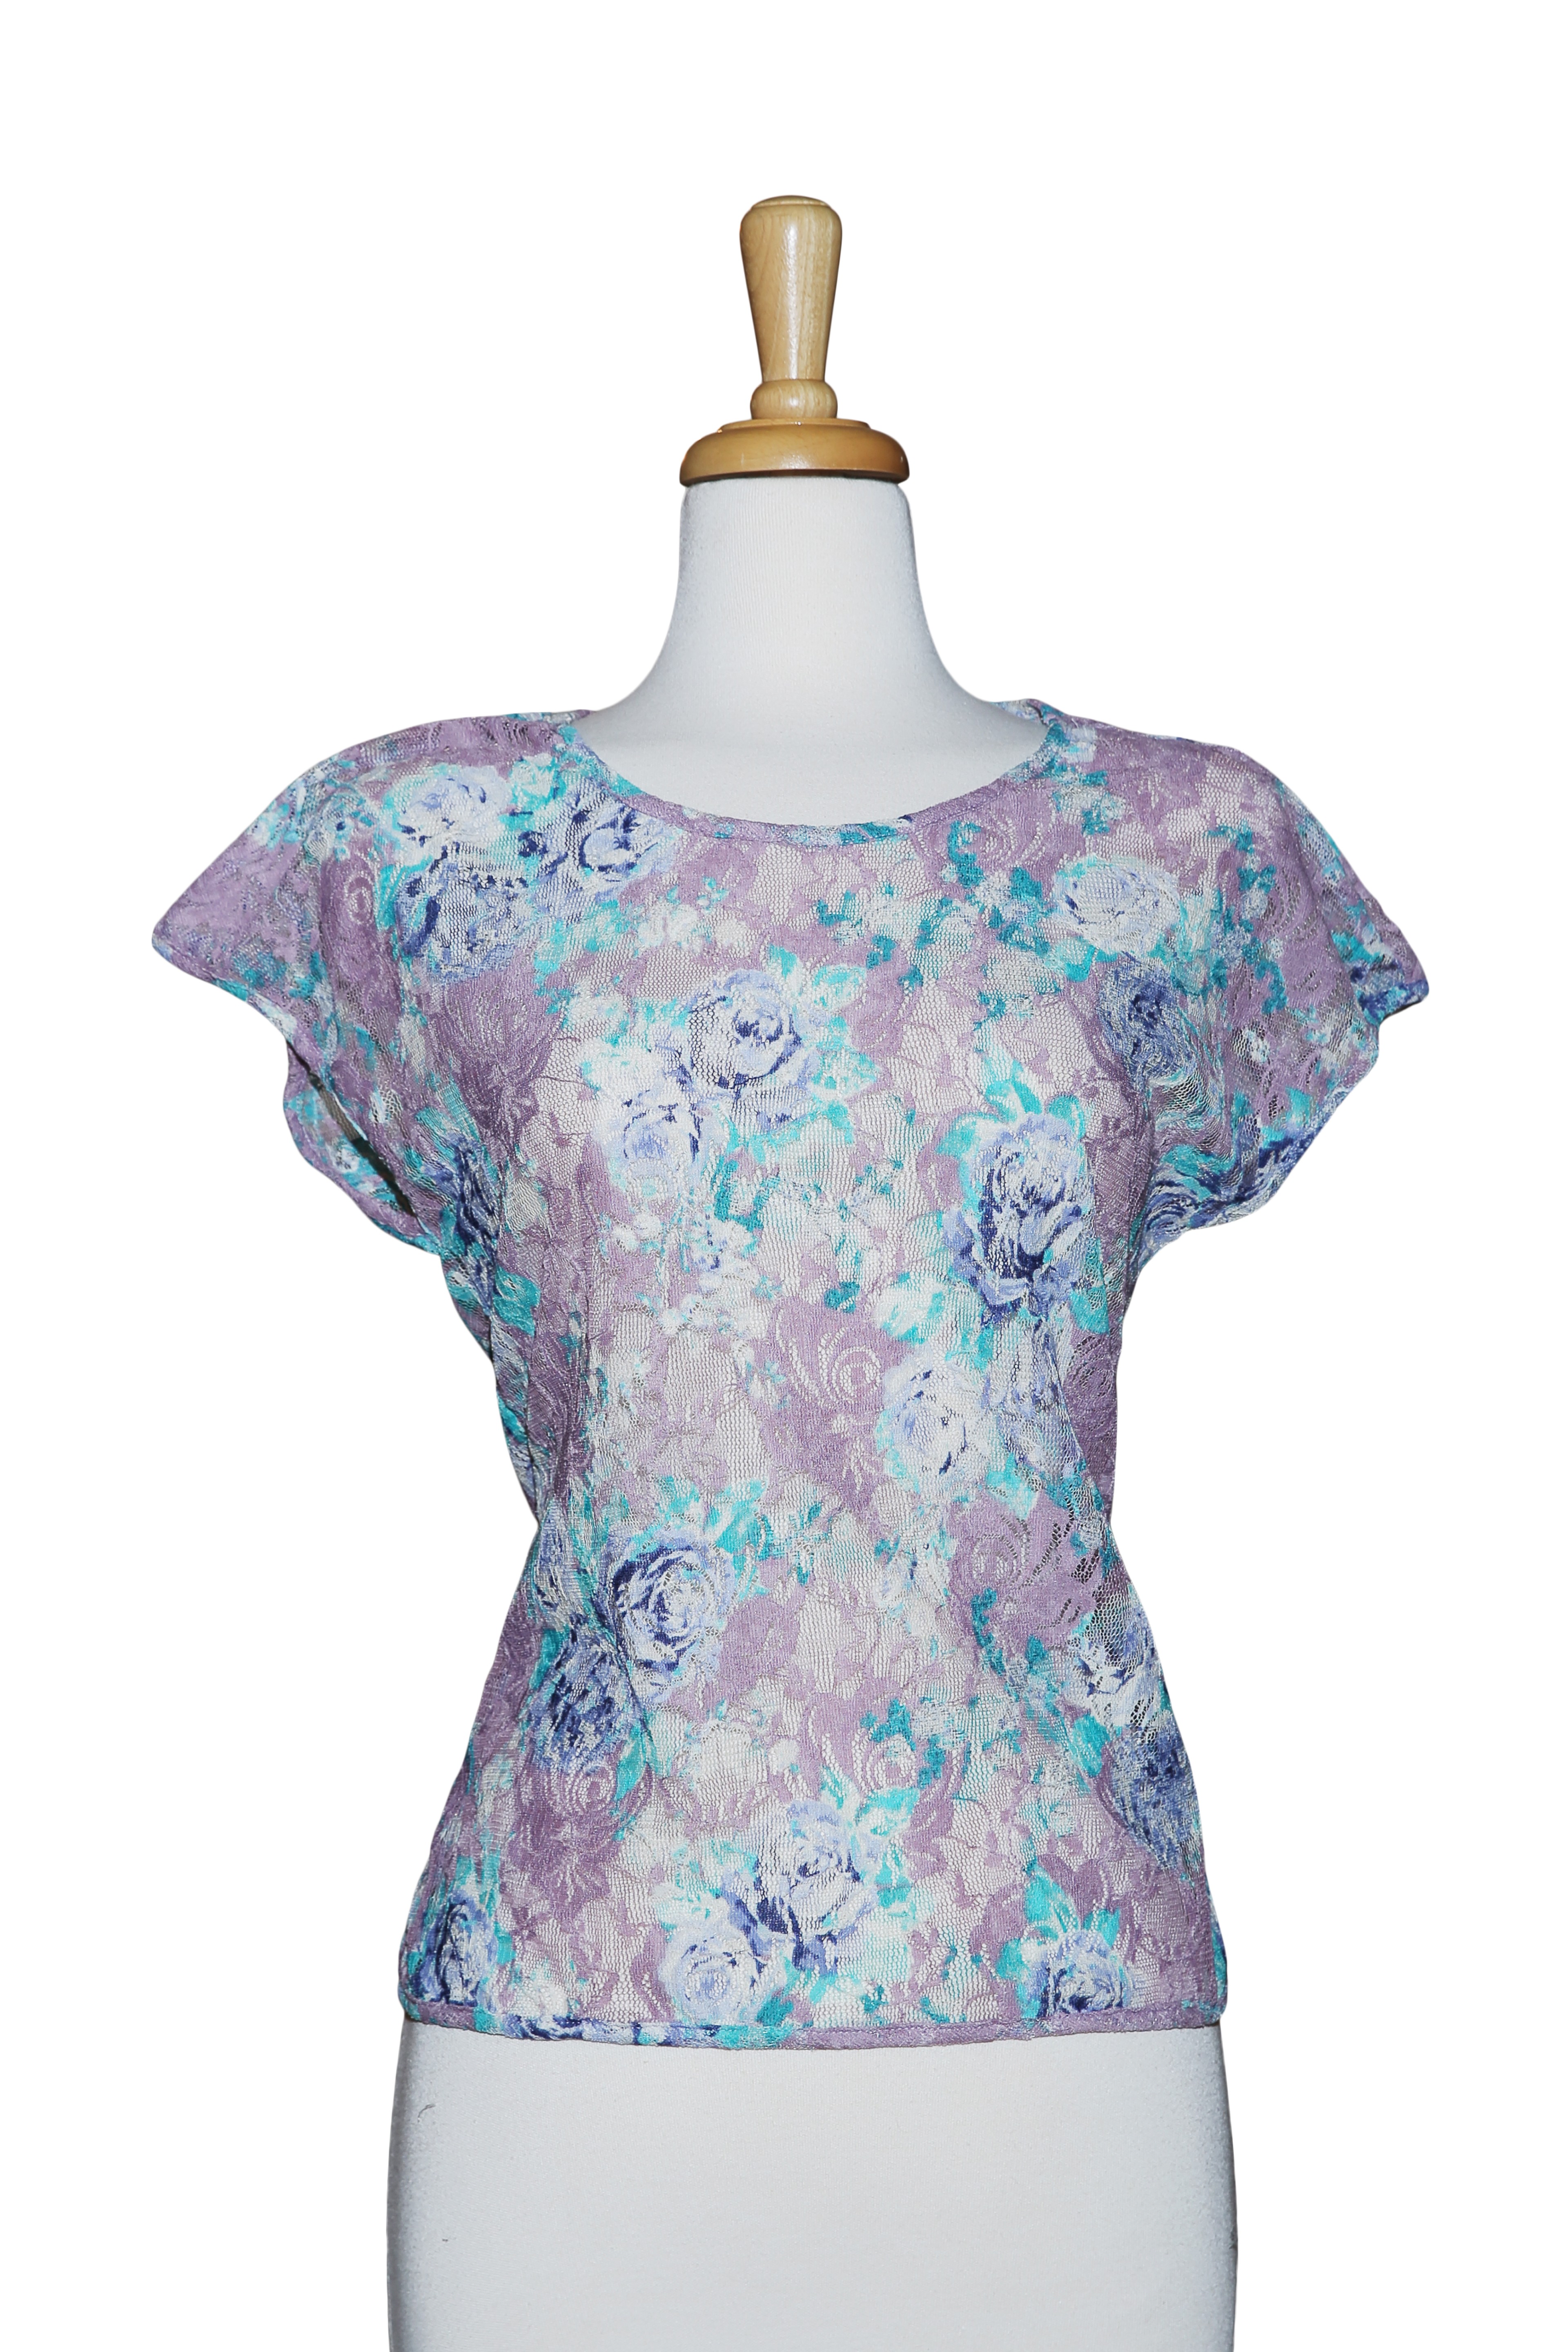 Mauve And Light Blue Lace Short Sleeve Top